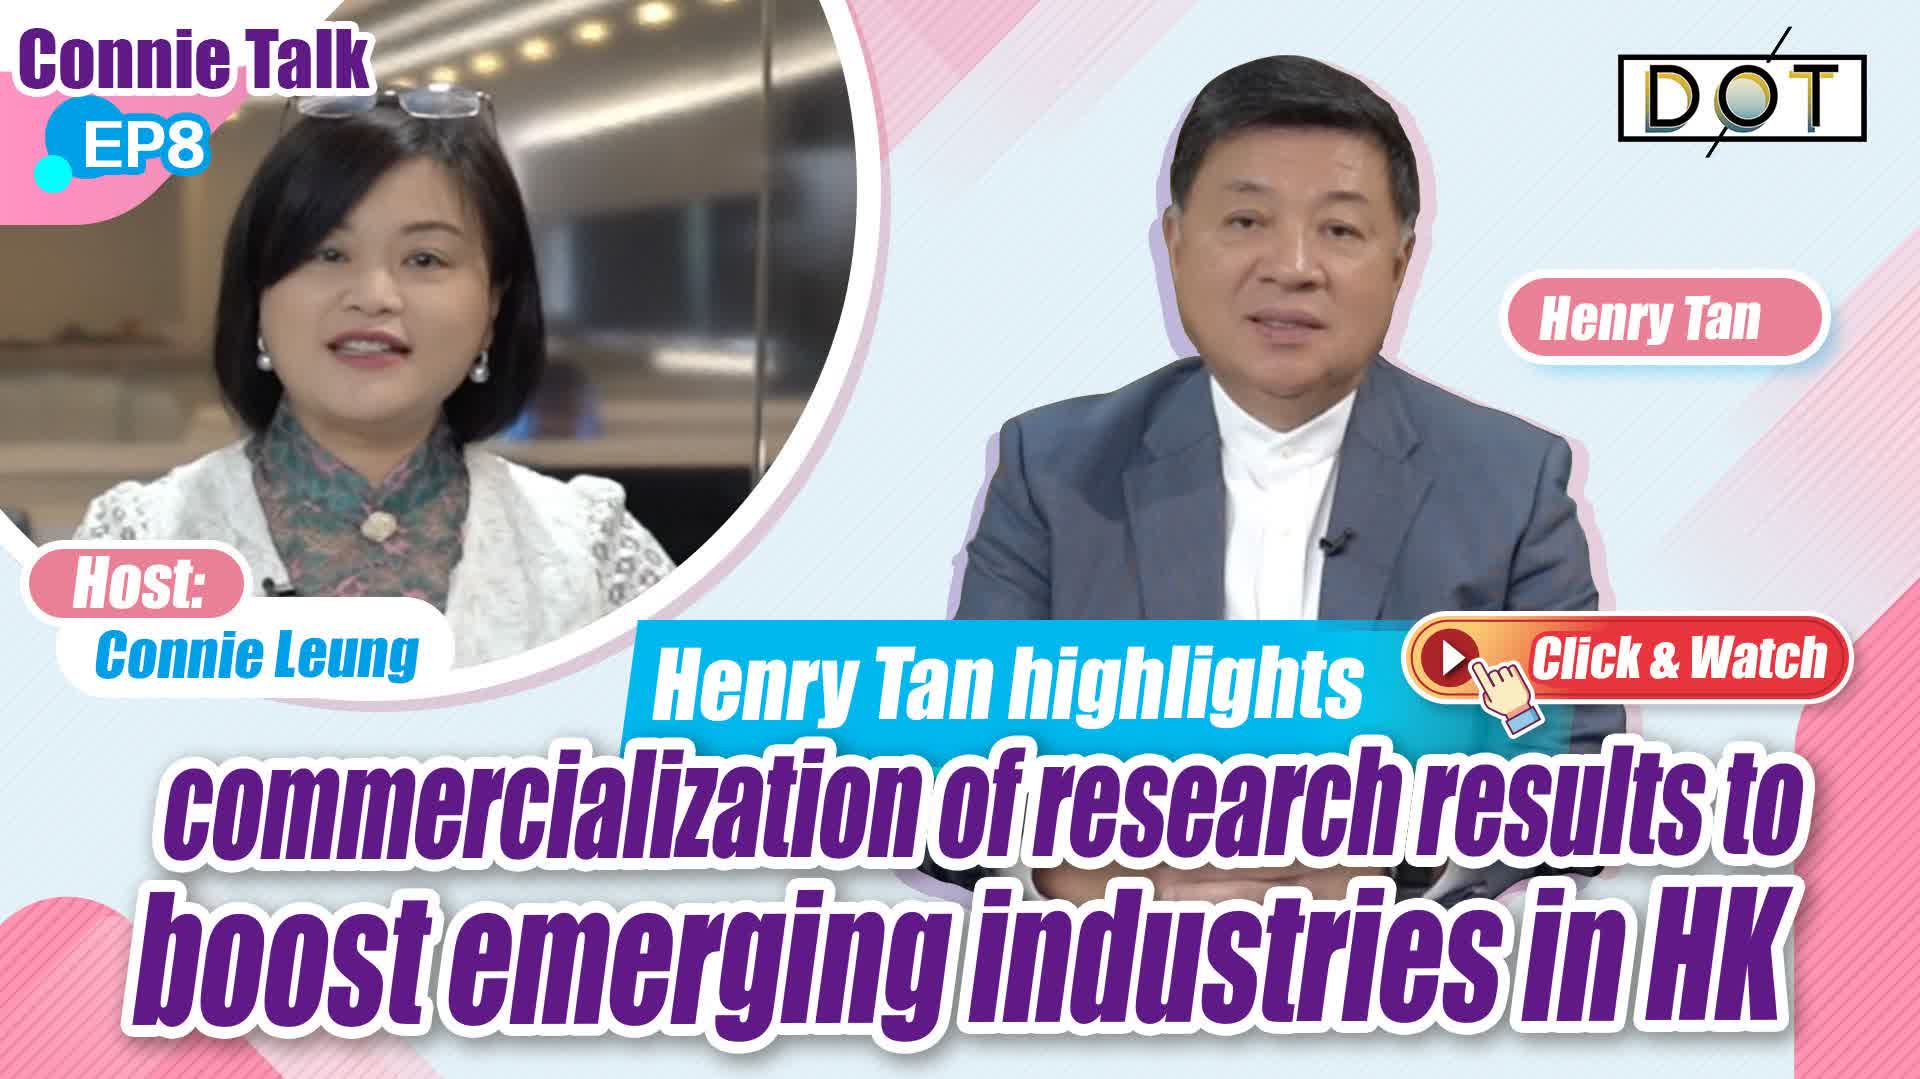 Connie Talk EP8 | Henry Tan highlights commercialization of research results to boost emerging industries in HK